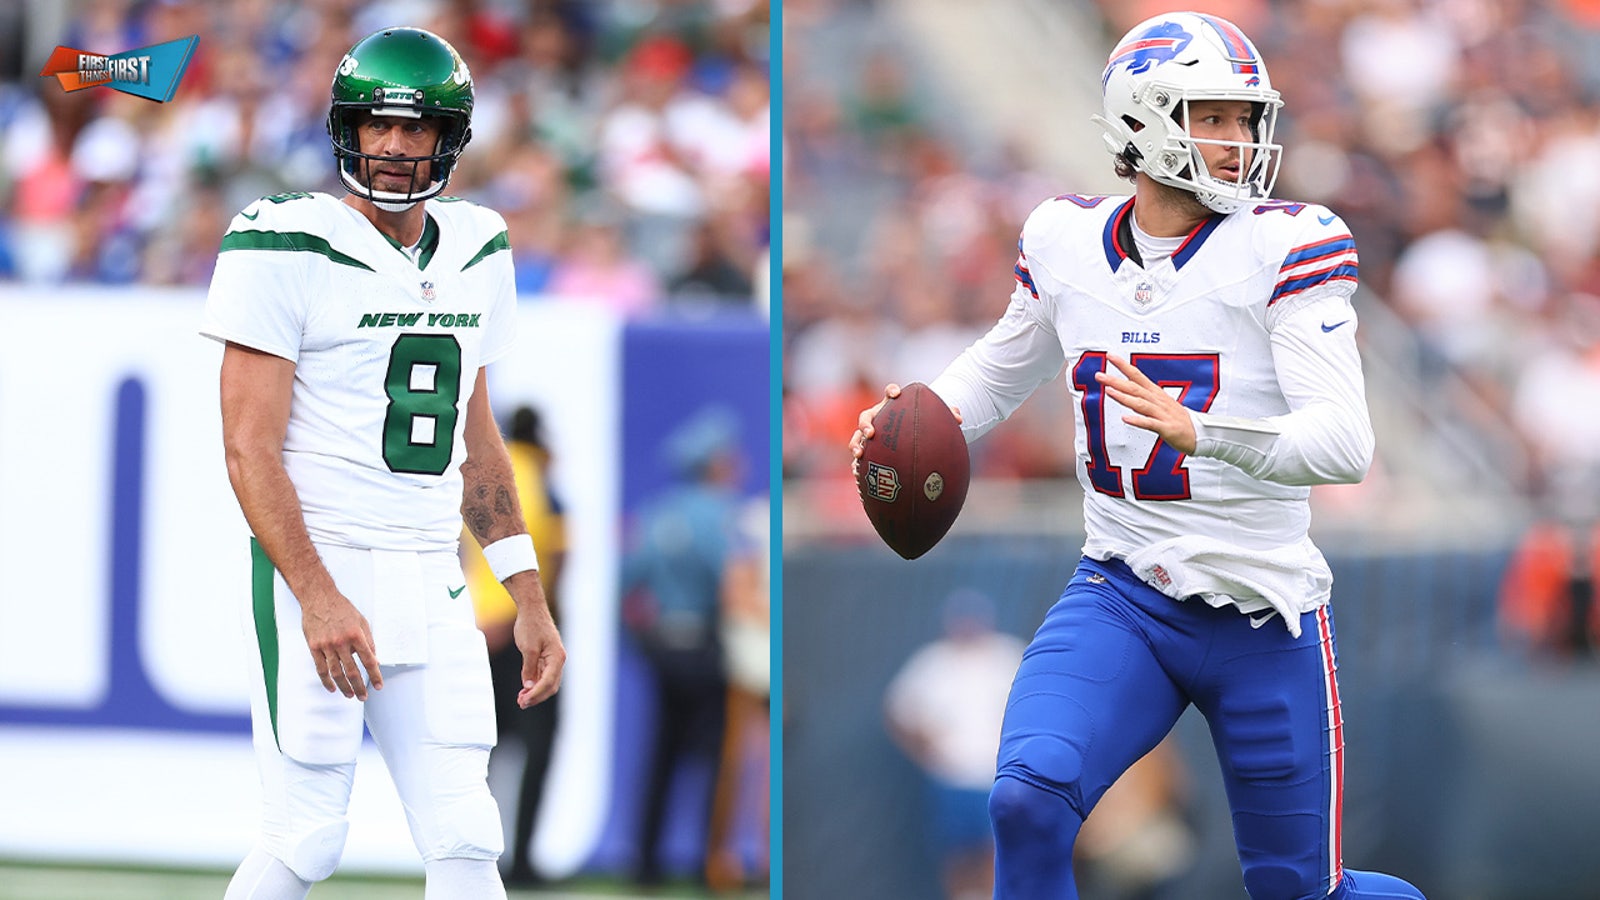 Jets vs. Bills are the talk of the AFC East